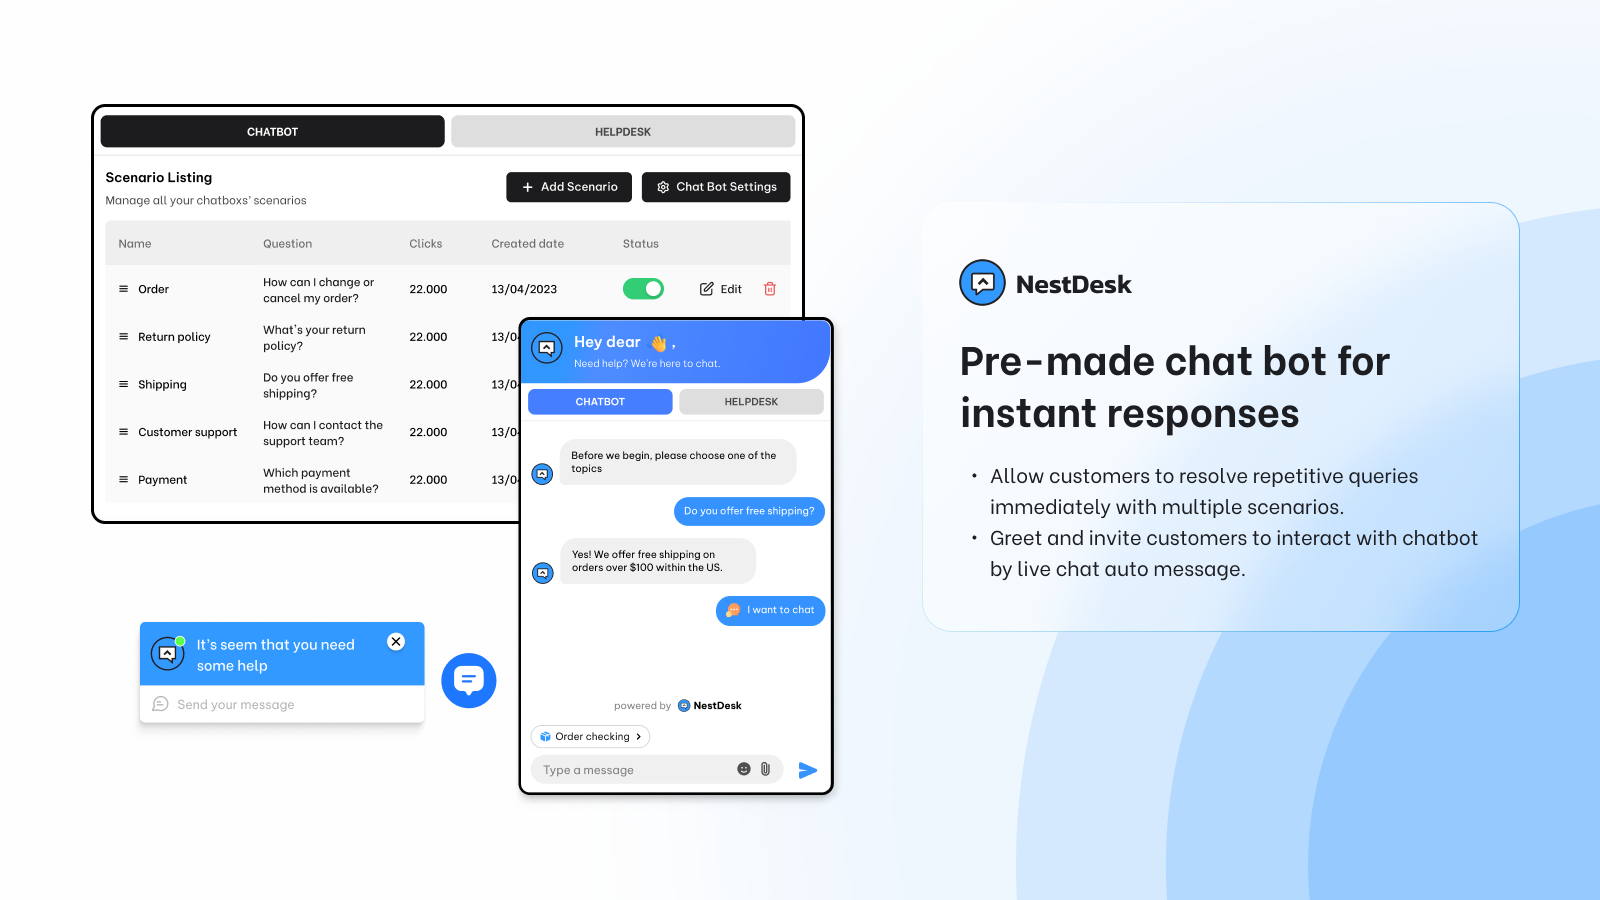 Automate answering repetitive questions with chatbot